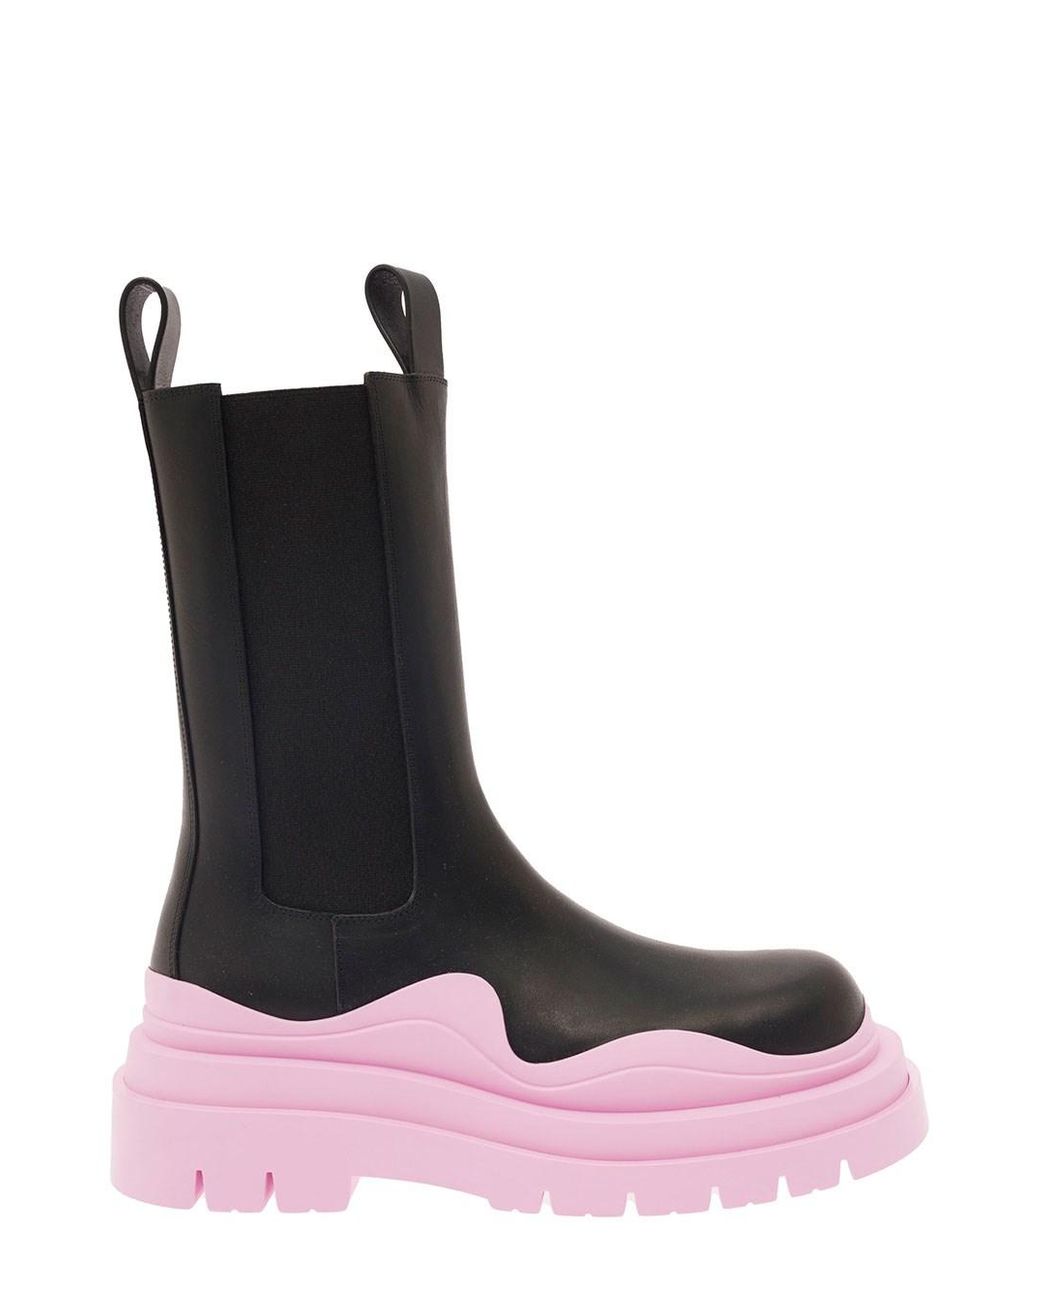 Bottega Veneta 'chelsea Tire' Boots With Pink Rubber Sole In Leather in ...